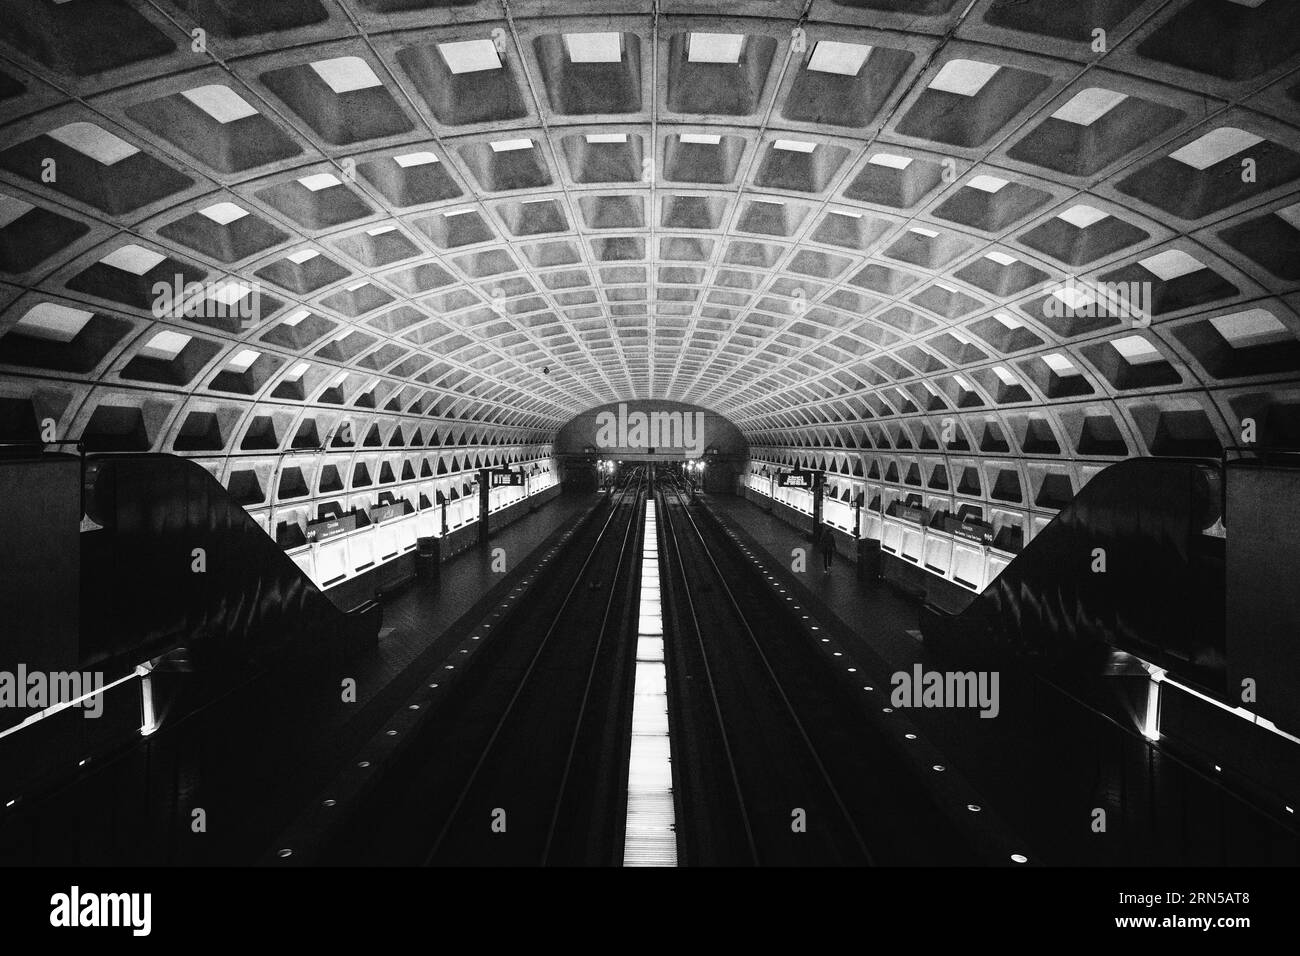 WASHINGTON DC, United States — Commuters move about the platform of a Washington DC Metro station, representing one of the key transportation hubs that serve the nation's capital. The Metro system plays an essential role in the daily transit of thousands, connecting neighborhoods, business districts, and points of interest. Stock Photo